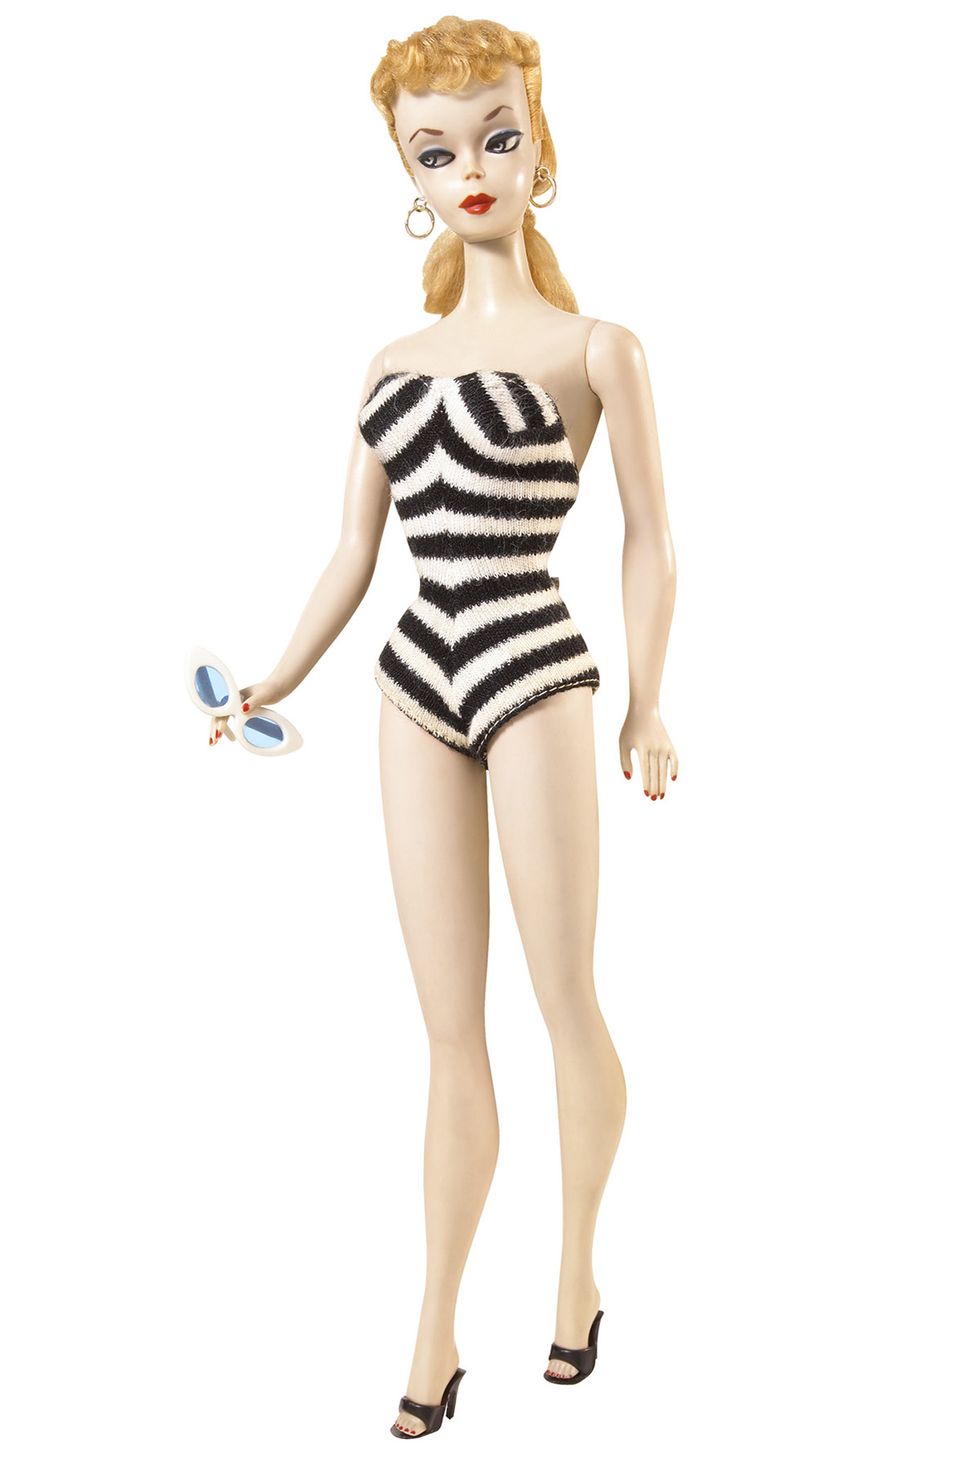 Barbie Has a New Body Cover Story